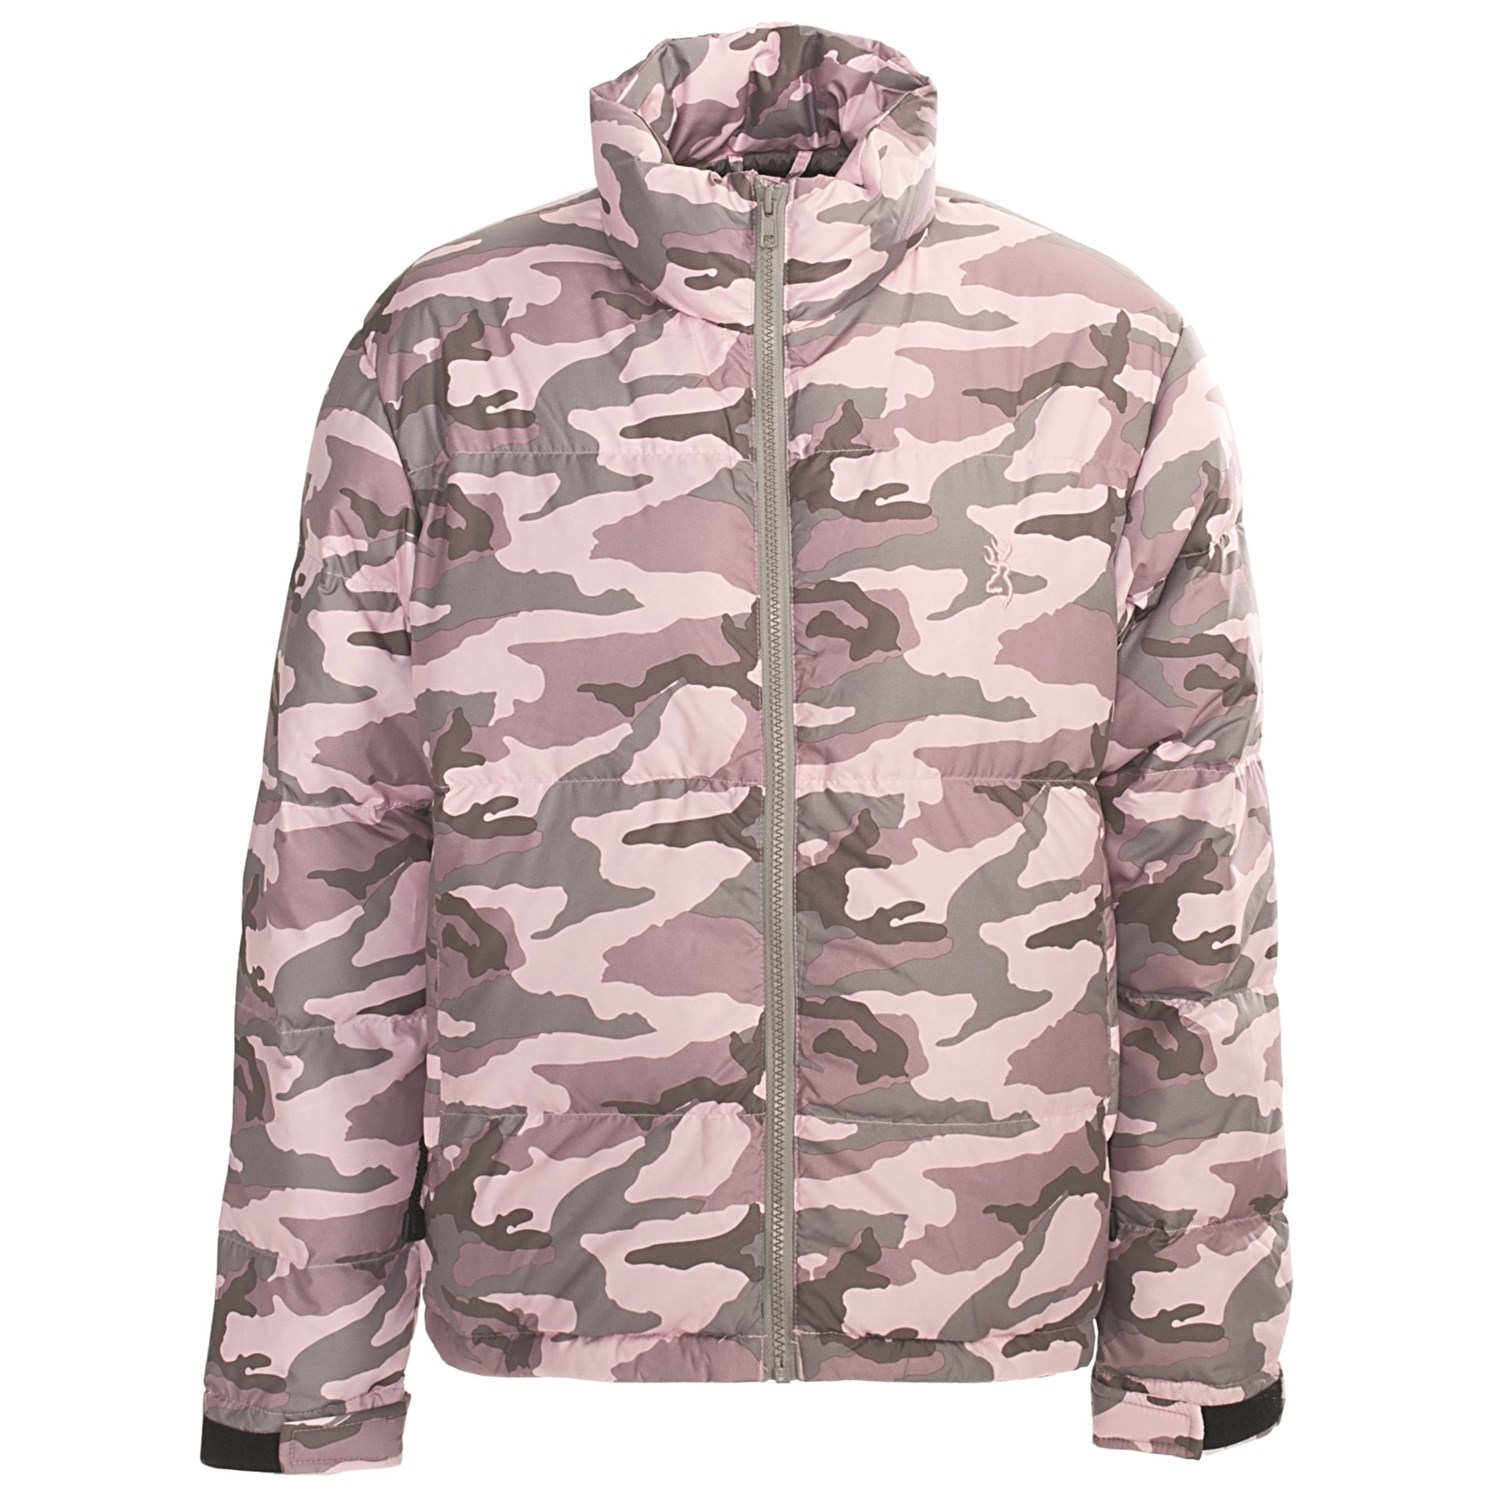 Canada Goose mens online authentic - Browning Pink Camo Down Jacket (For Women) 5060R - Save 35%